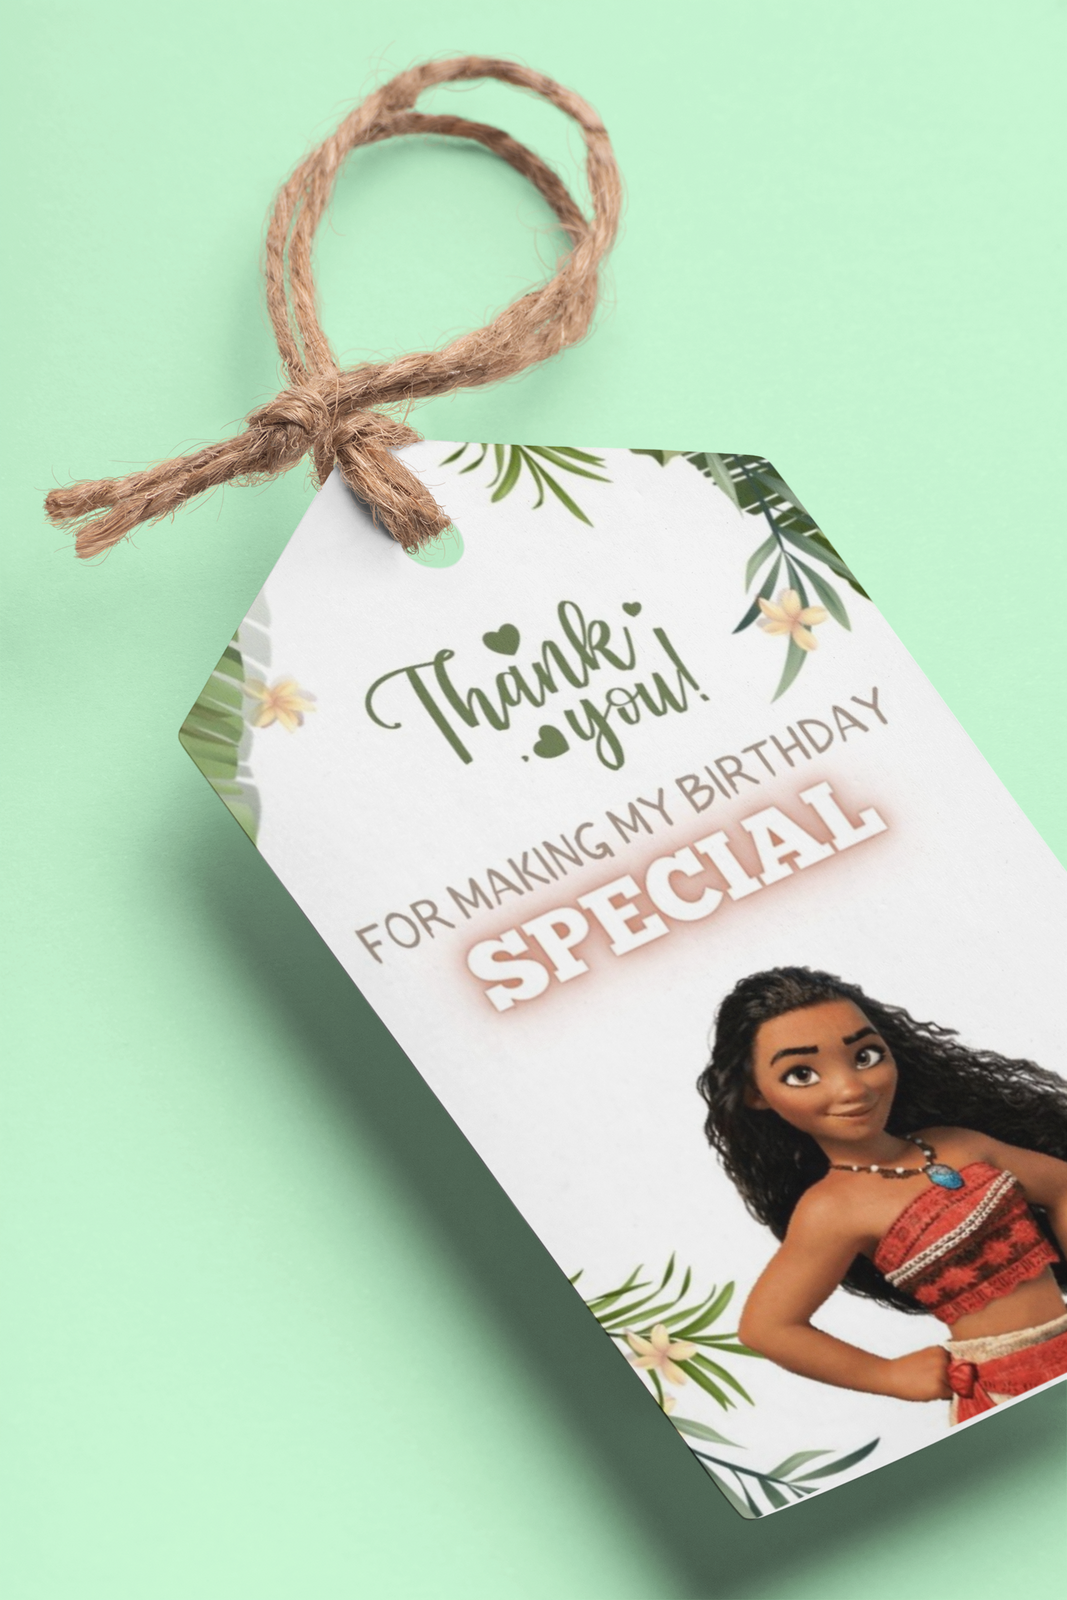 Moana Theme Birthday Favour Tags (2 x 3.5 inches/250 GSM Cardstock/Mixcolour/30Pcs)